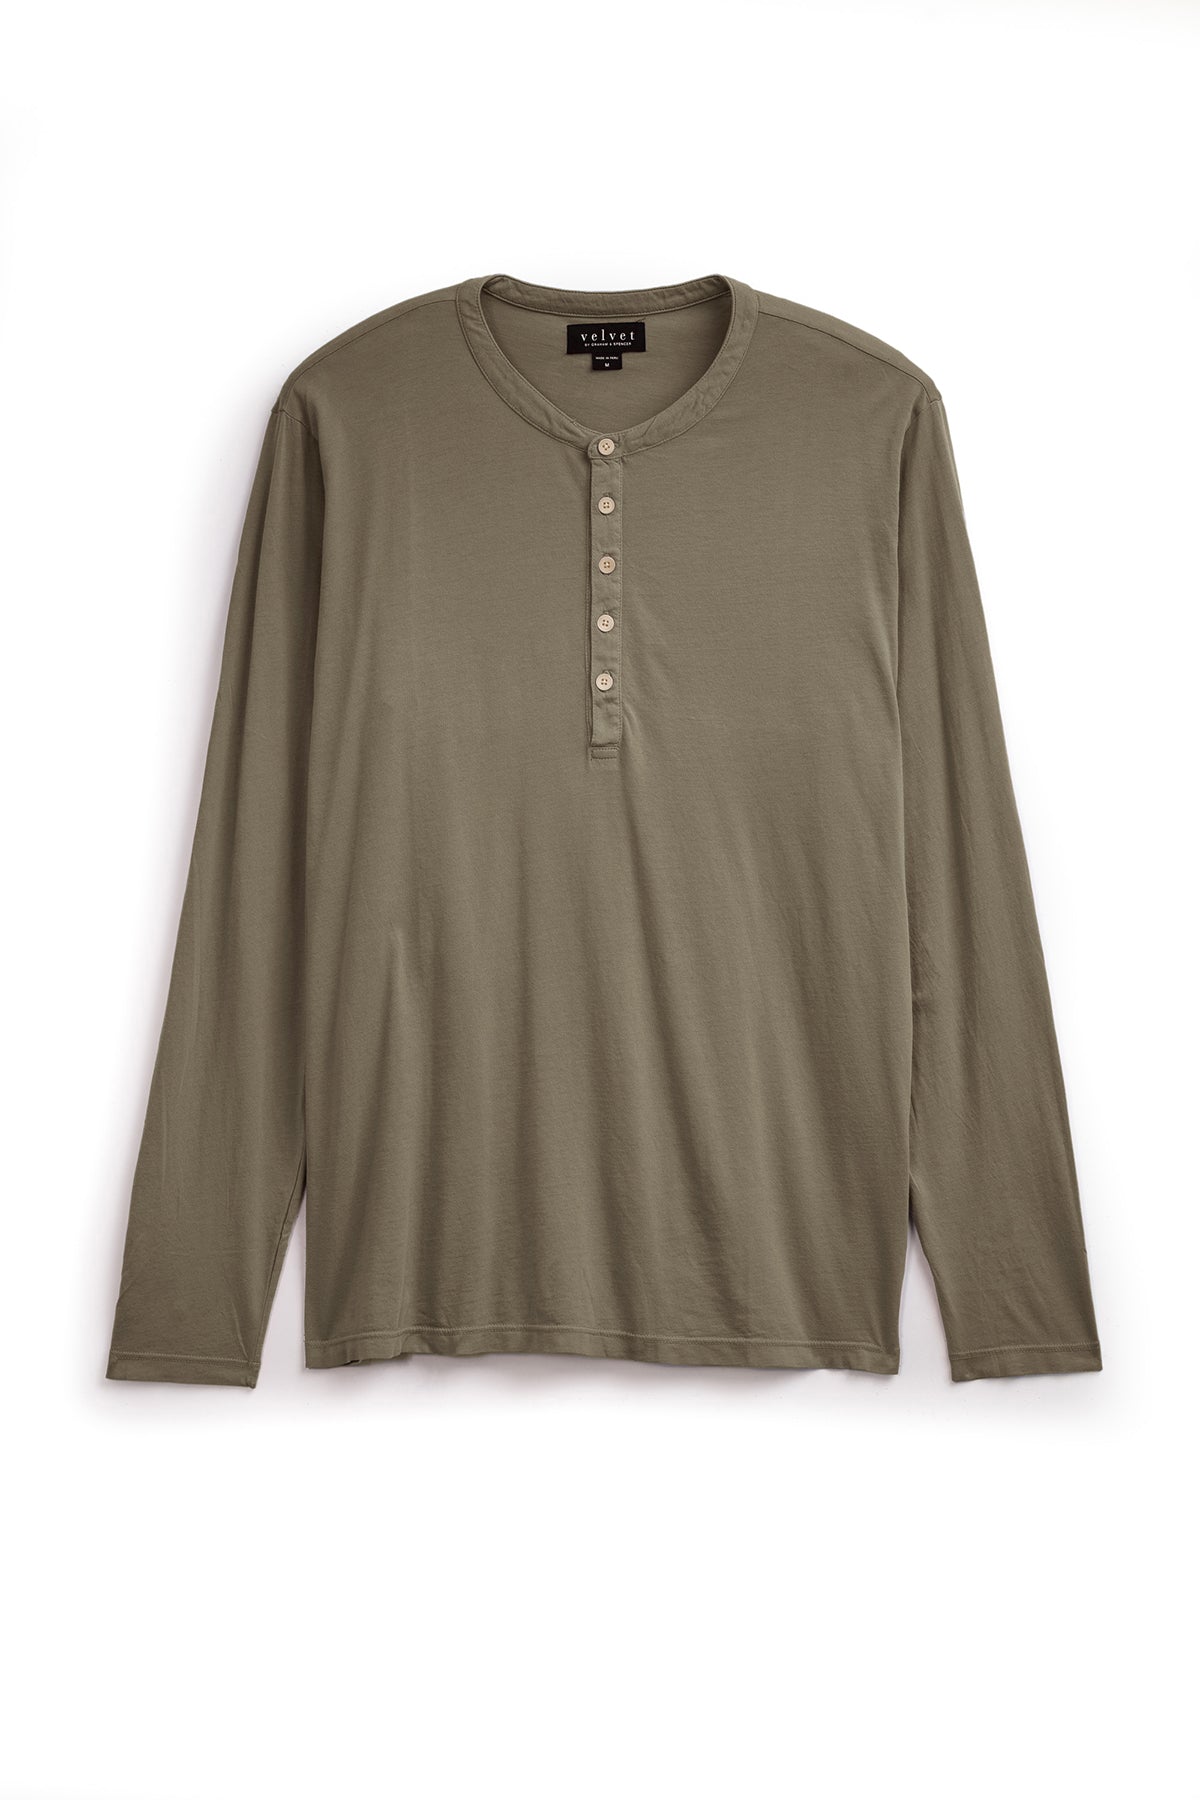   Olive green long-sleeve ALVARO HENLEY with a buttoned placket, crafted from a whisper knit for a lightweight feel, displayed on a white background by Velvet by Graham & Spencer. 